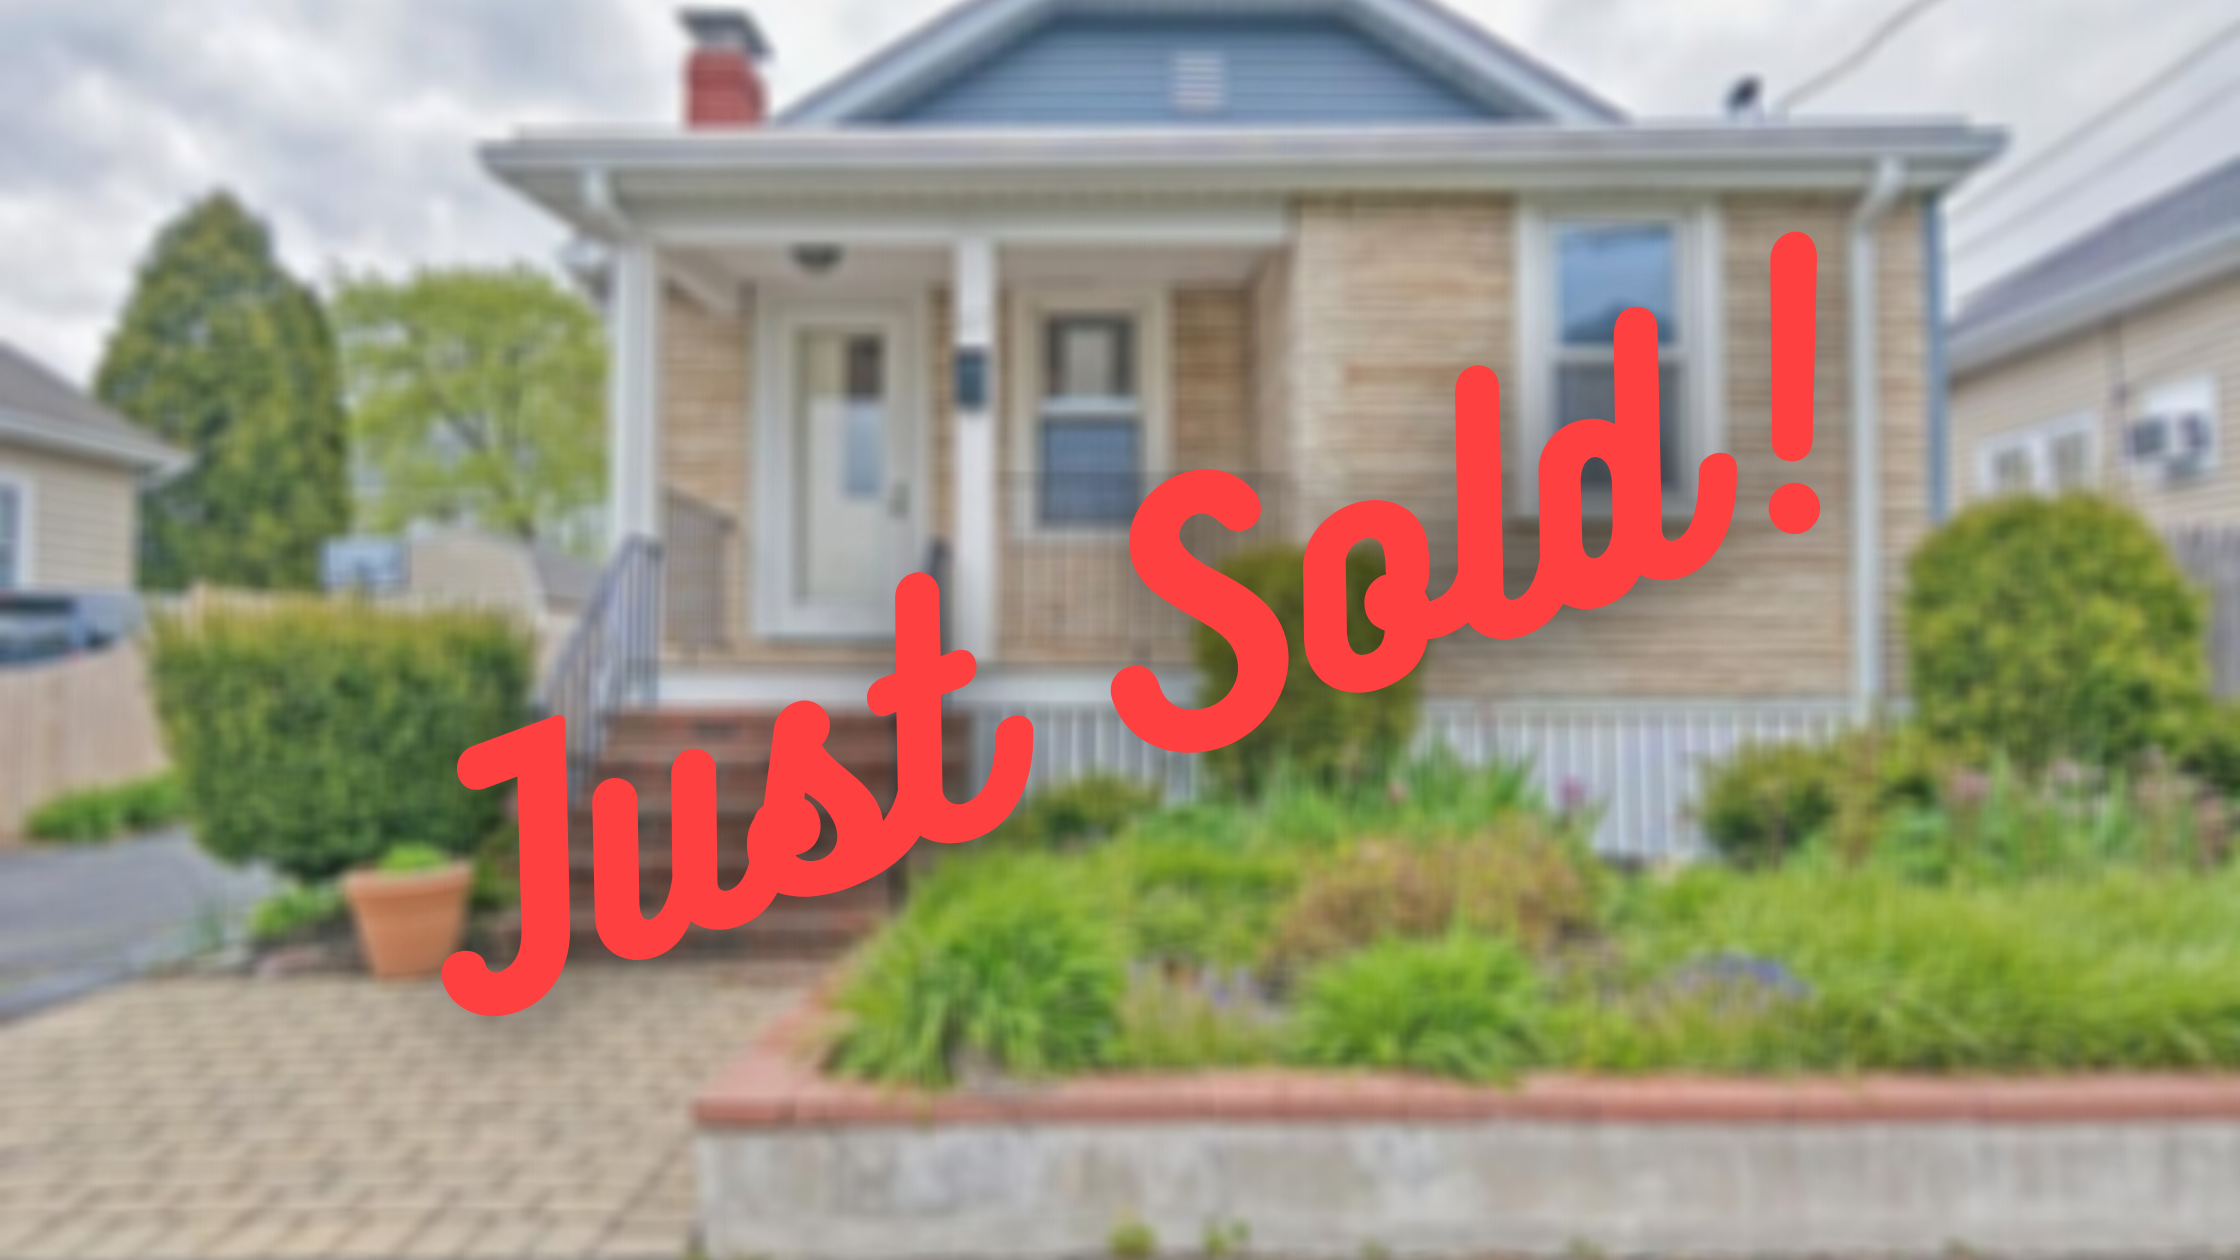 JUST SOLD - 67 Campbell St, Quincy, MA 02169